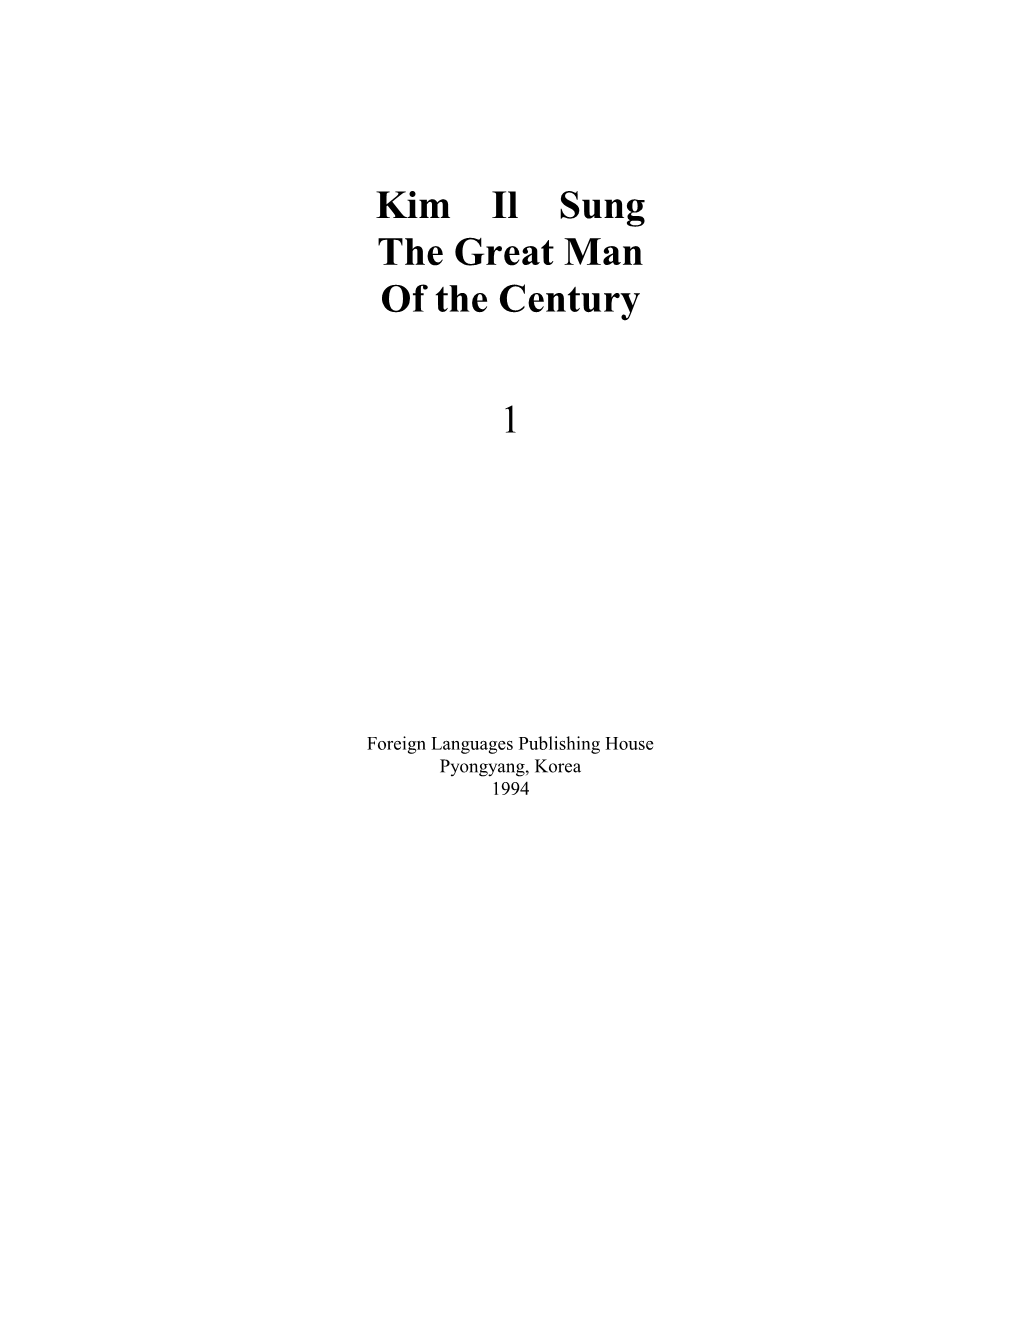 Kim Il Sung the Great Man of the Century